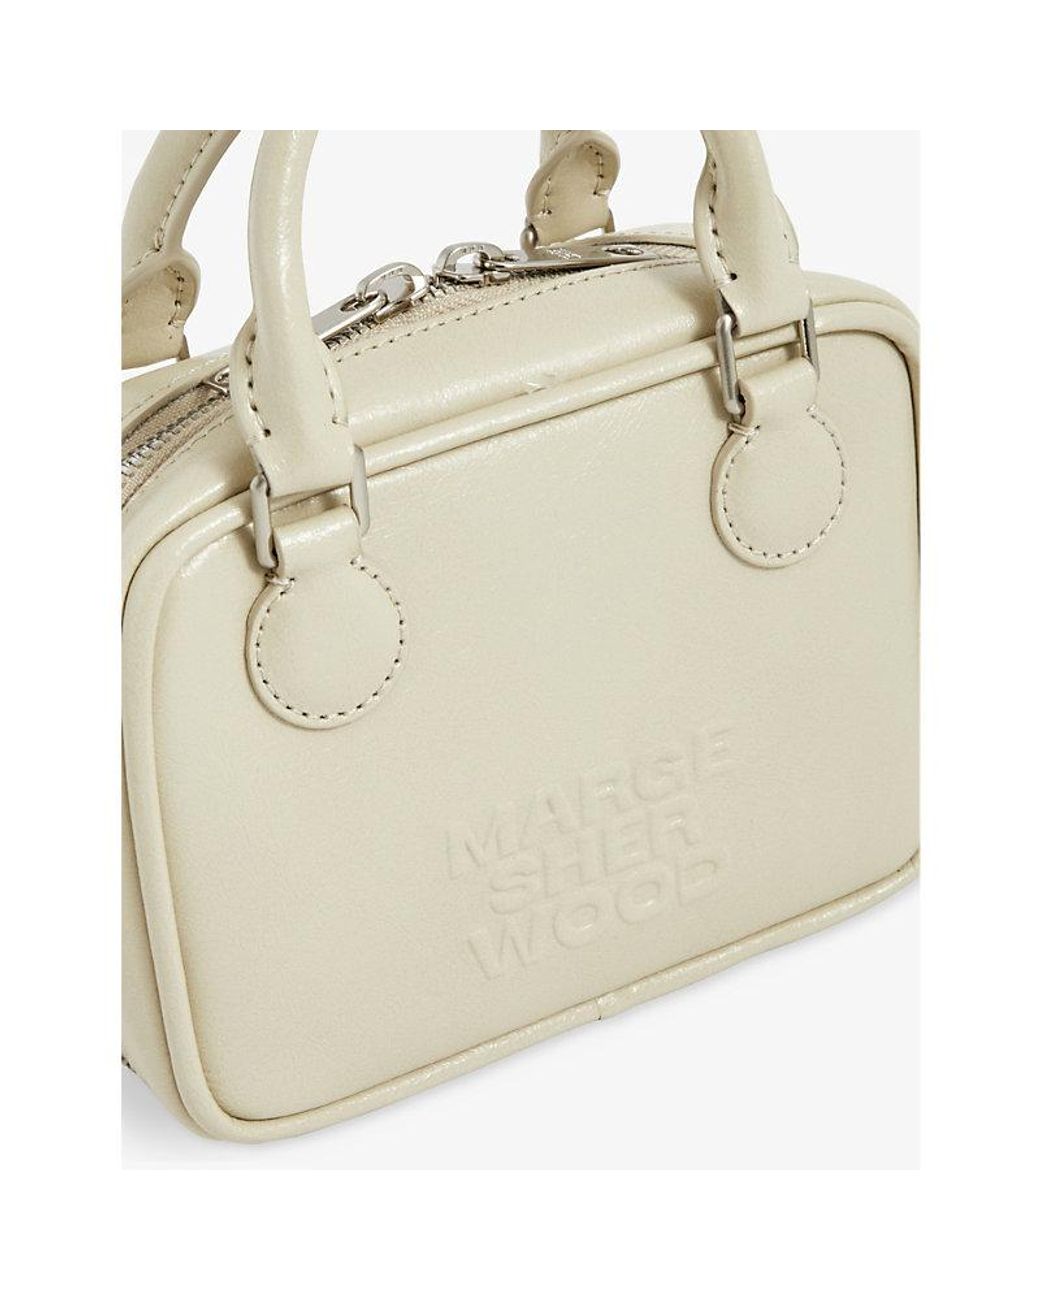 We'll discover the Piping Shoulder Bag Marge Sherwood that is right for you  by utilizing our knowledgeable staff